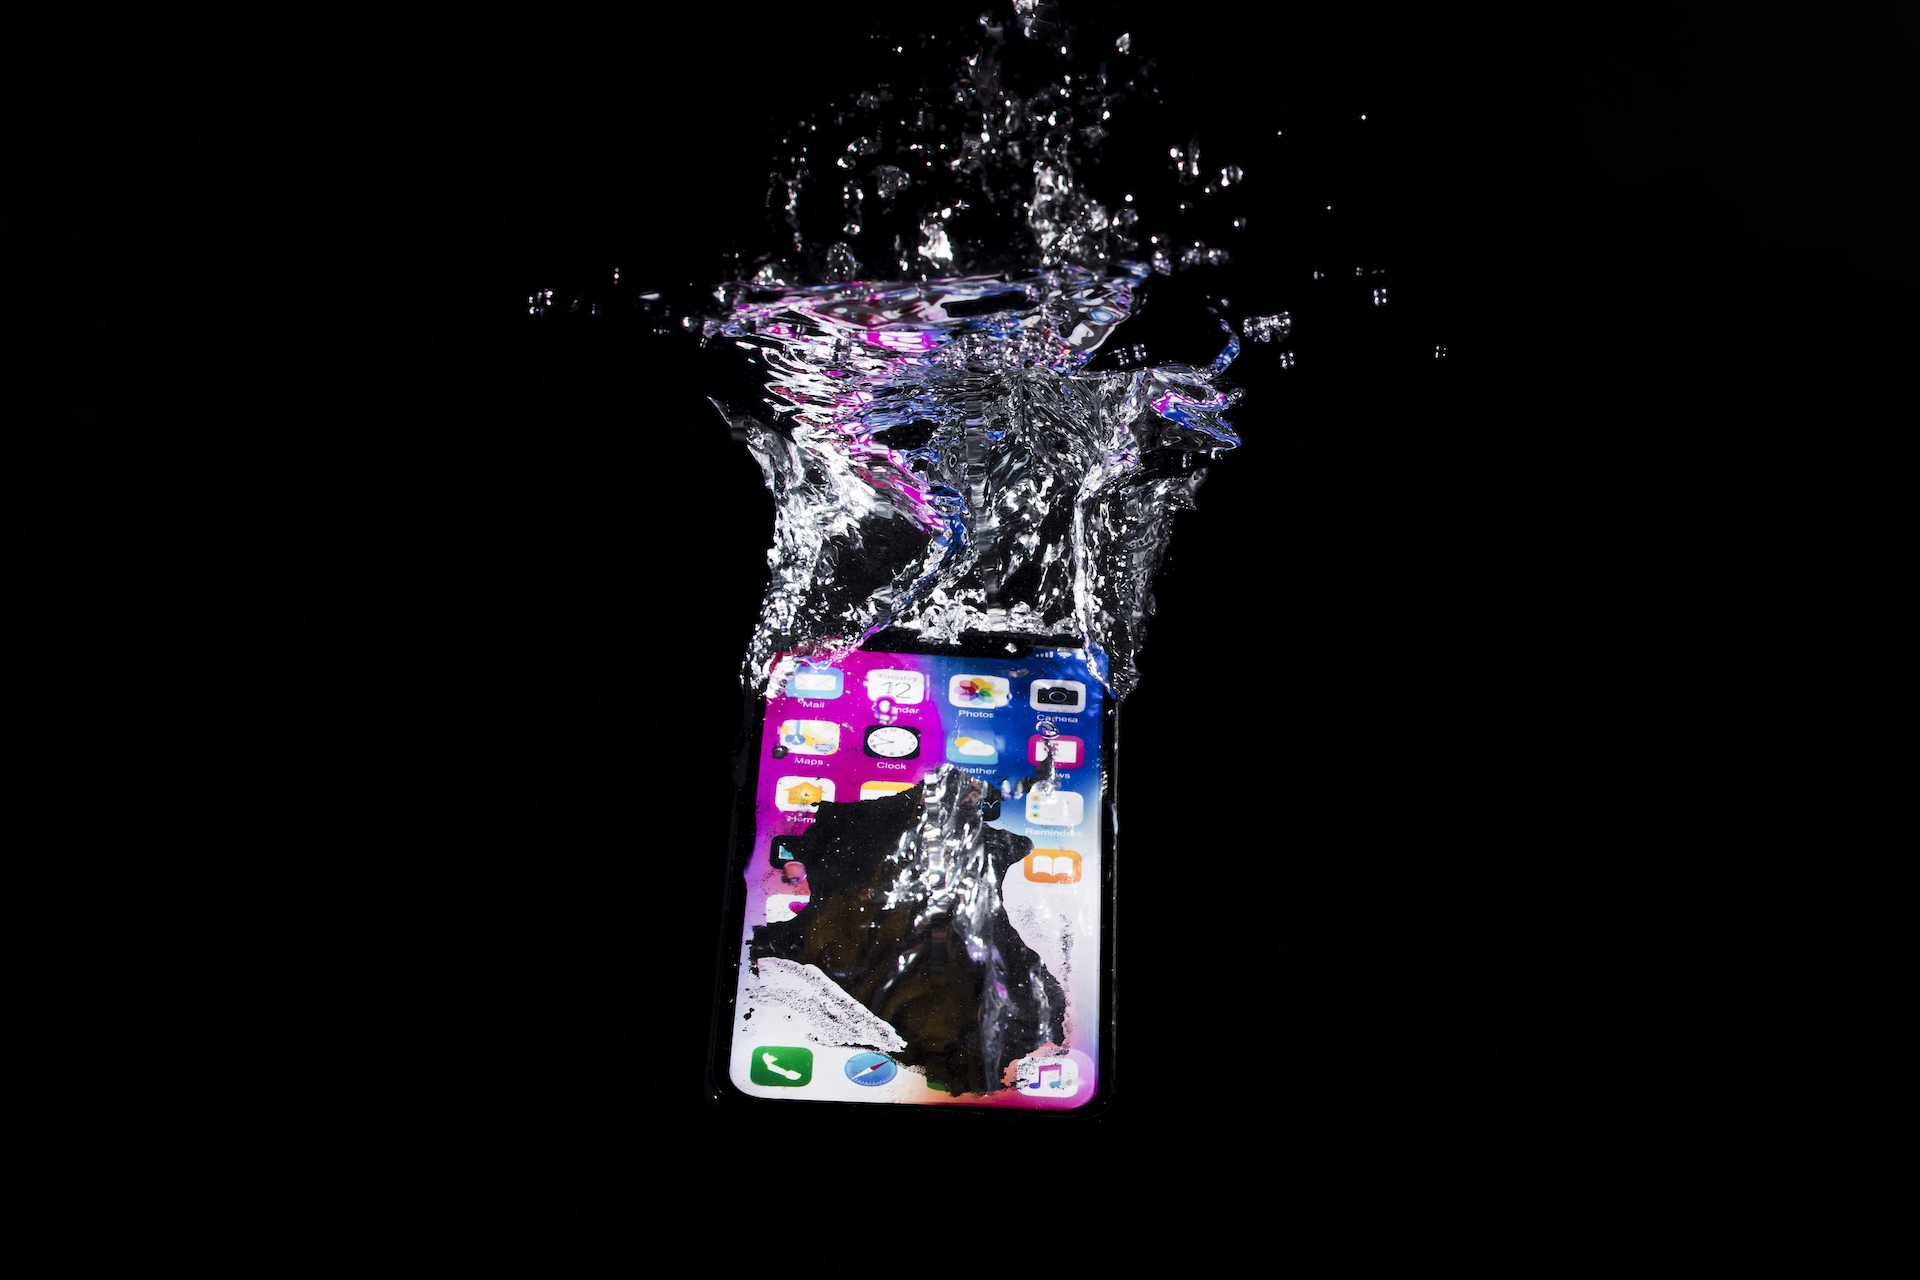 iPhone Dropped in Water and Submerged